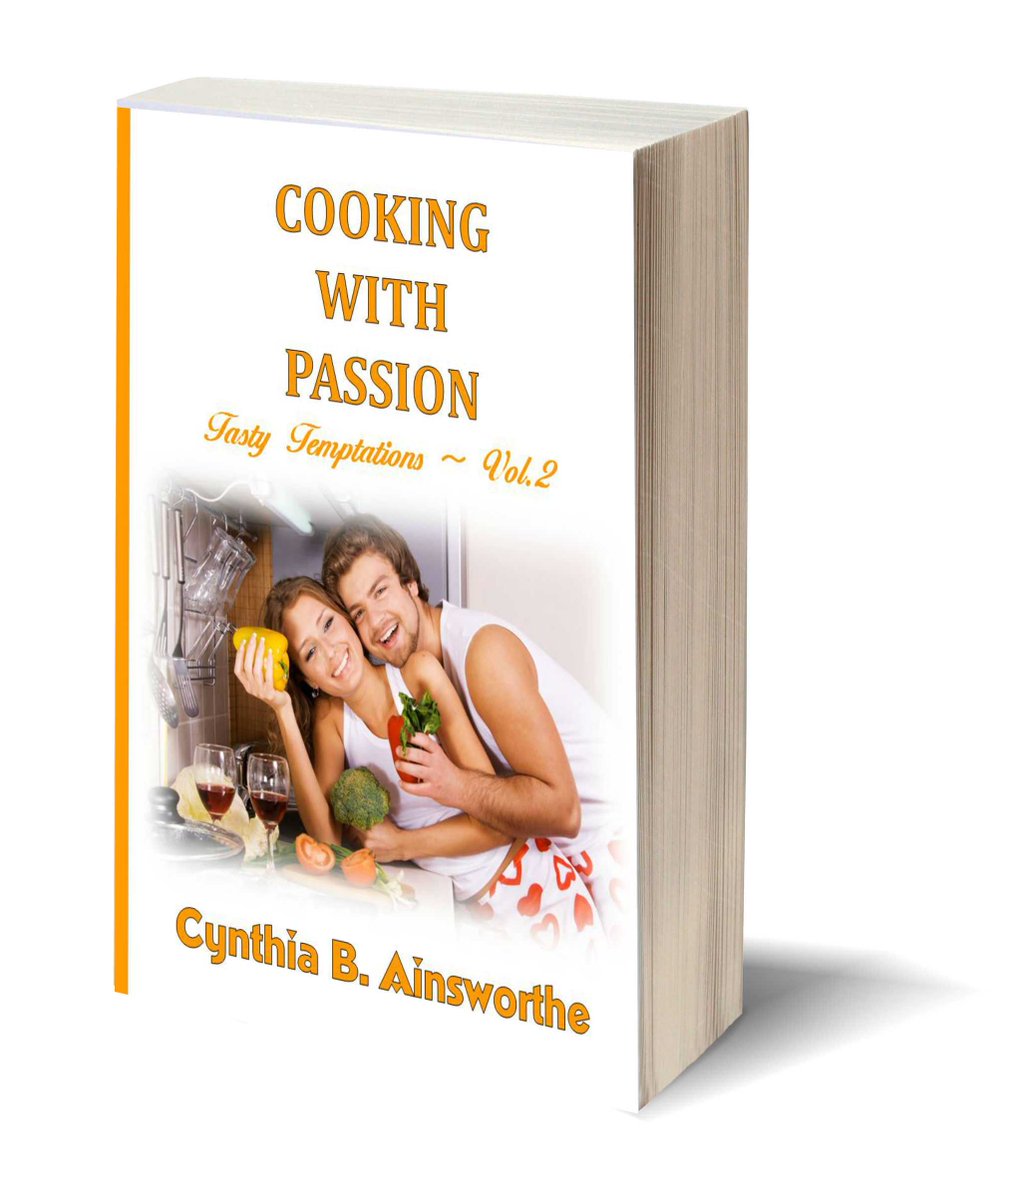 Delicious recipes that range from simple to complex!
COOKING WITH PASSION
viewbook.at/CookingWithPas… 
smashwords.com/books/view/704…  
wp.me/P5rIsN-23U 
@CynB_Ainsworthe
#IARTG #bookaddict #RomanceReaders
Pizzazz Promotions wp.me/P5rIsN-Ft 
 25